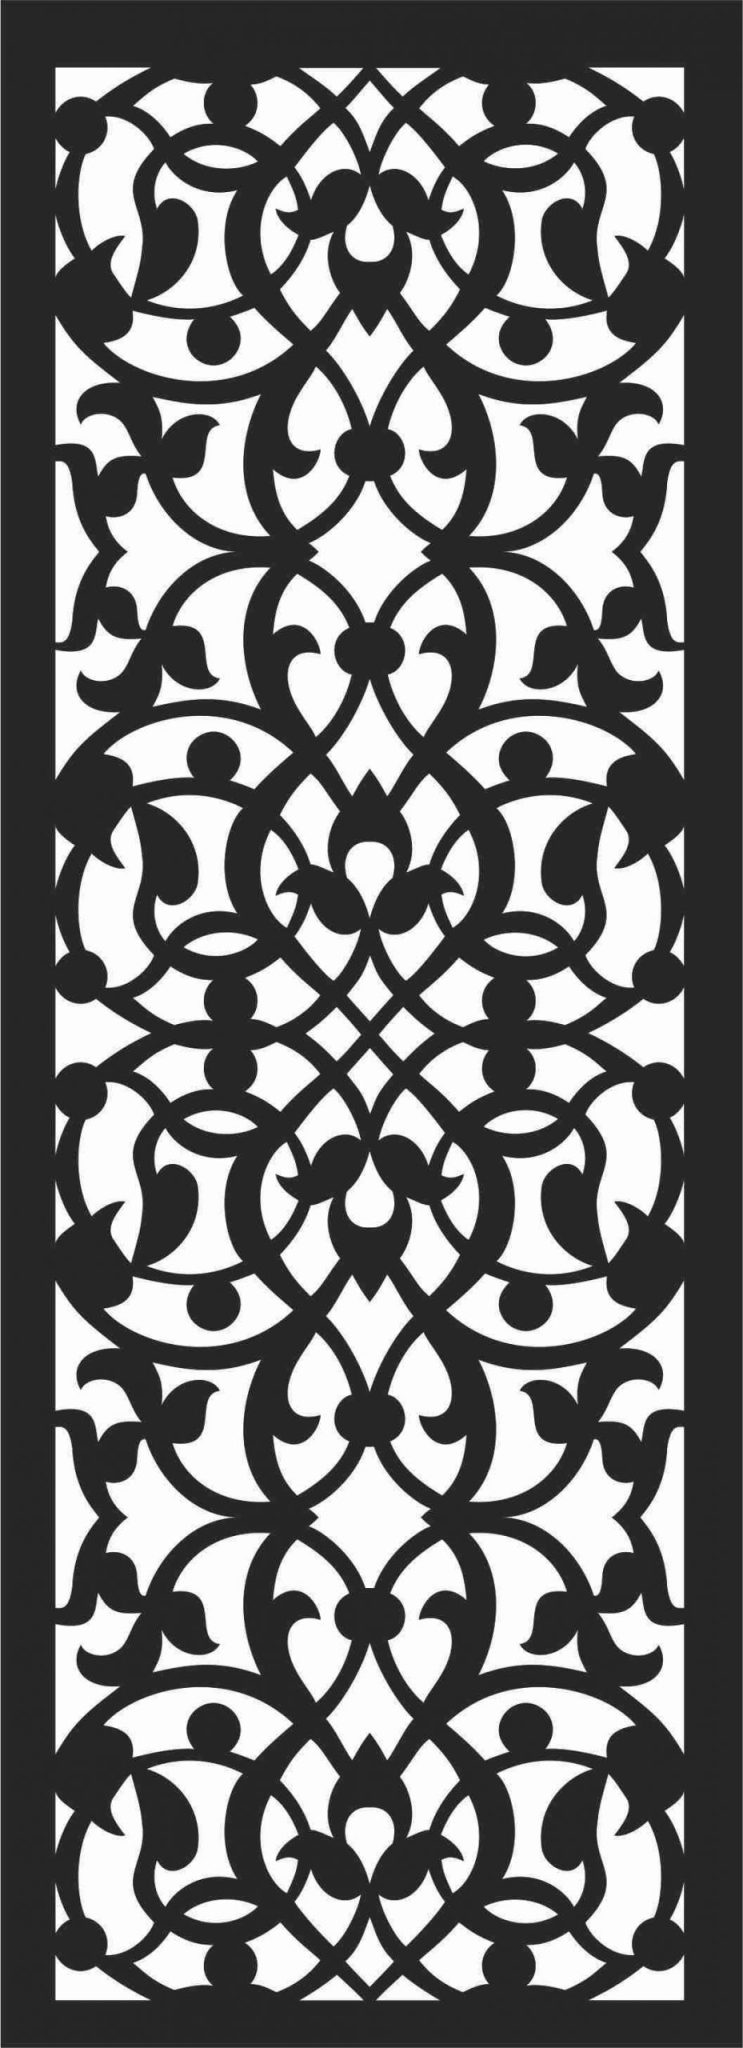 Metal Privacy Screen Panel DXF File